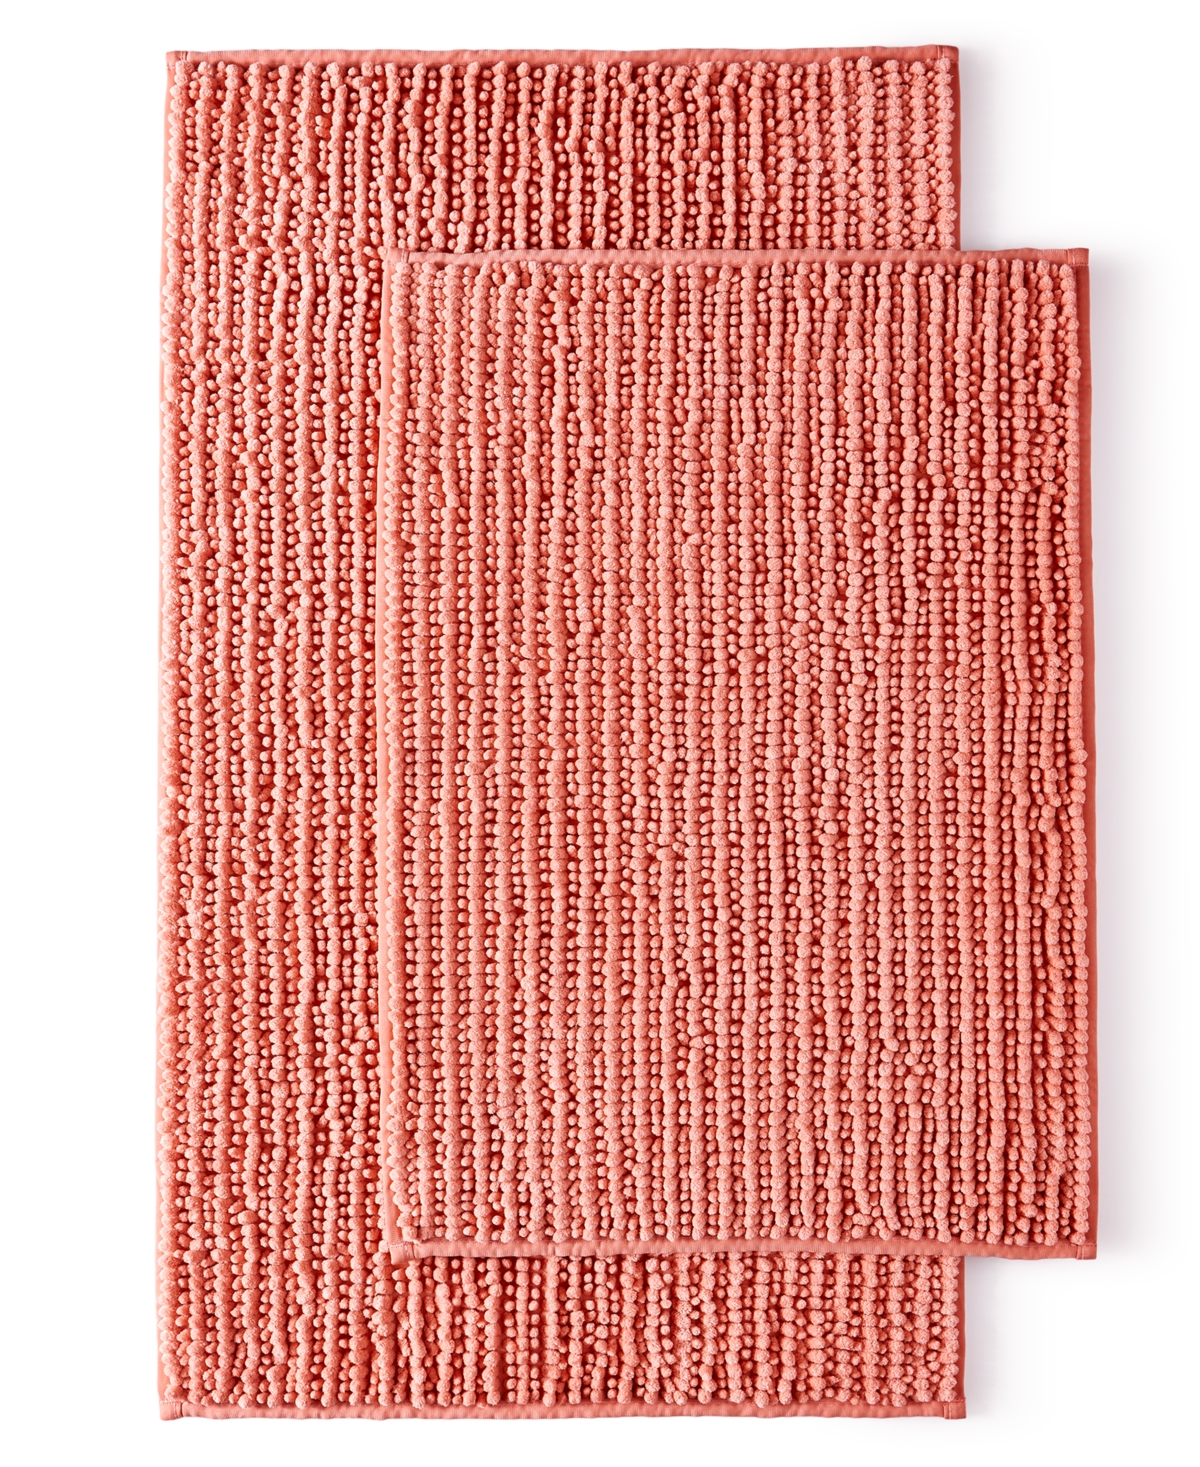 Home Design Noodle 2-pc. Bath Rug Set, Created For Macy's In Warm Peach